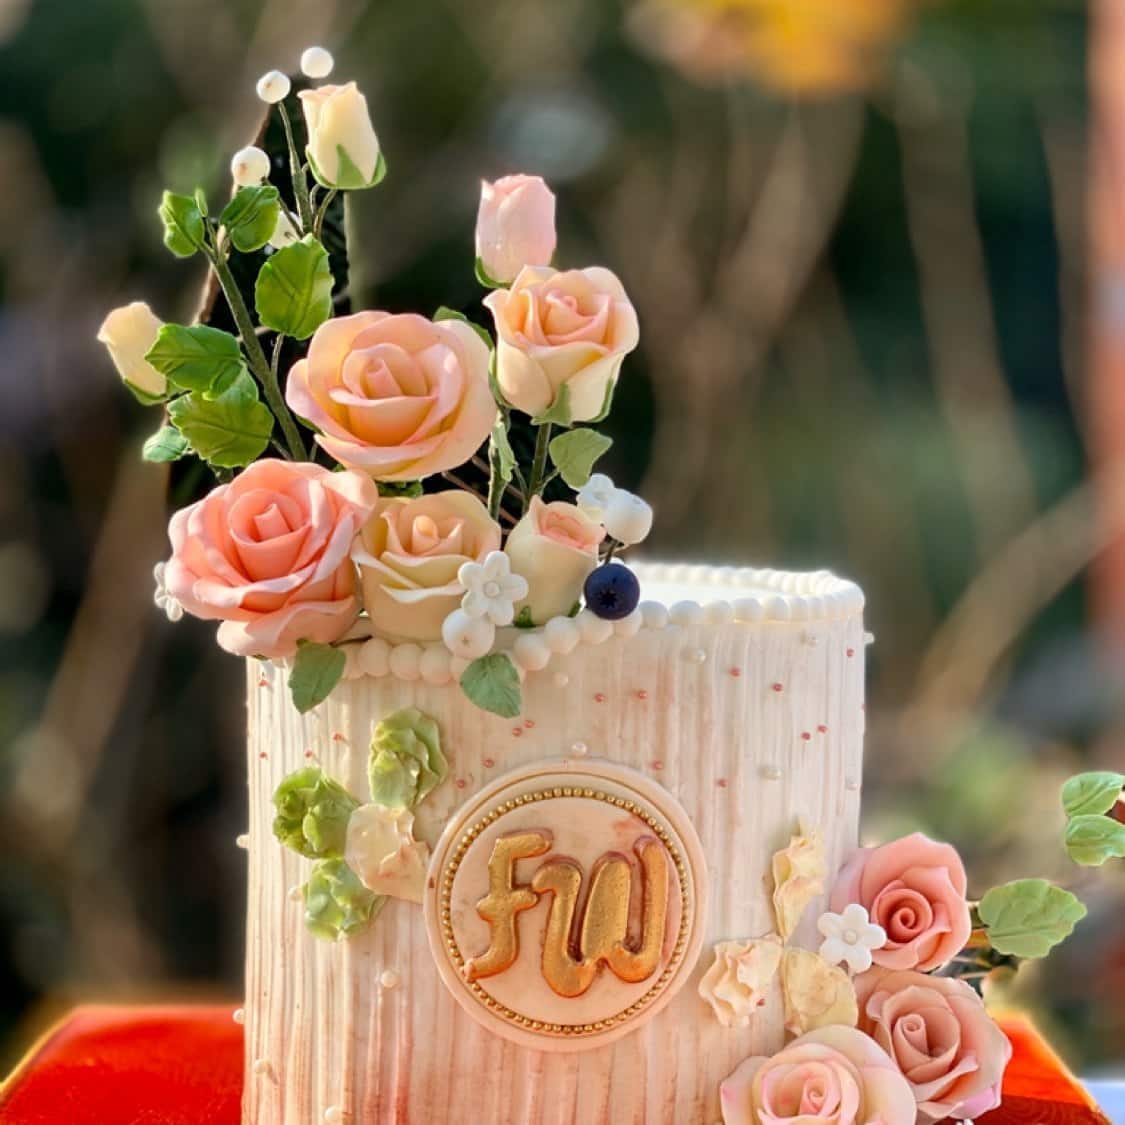 The 10 Best Wedding Cakes Shops in Agra - Weddingwire.in